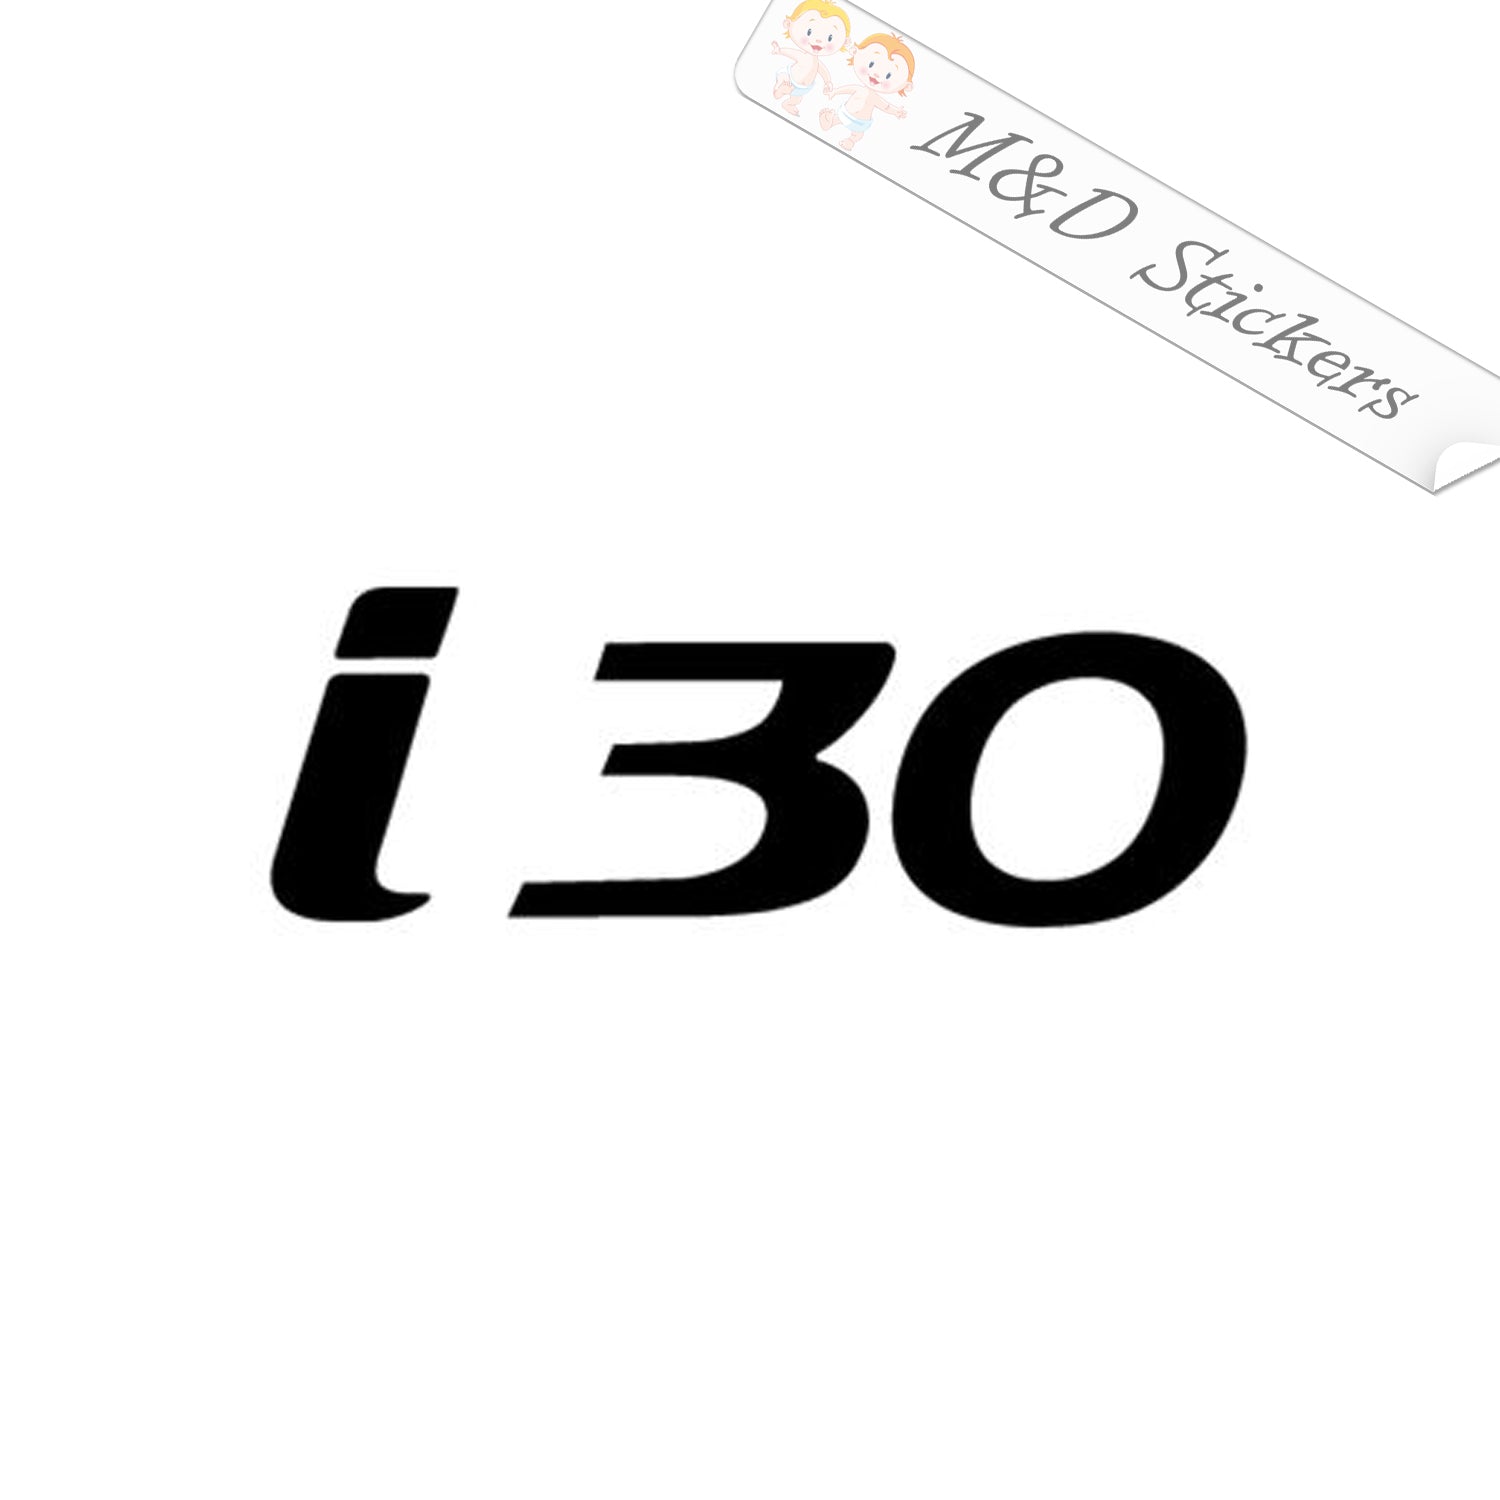 Hyundai i30 script (4.5 - 30) Vinyl Decal in Different colors & size –  M&D Stickers